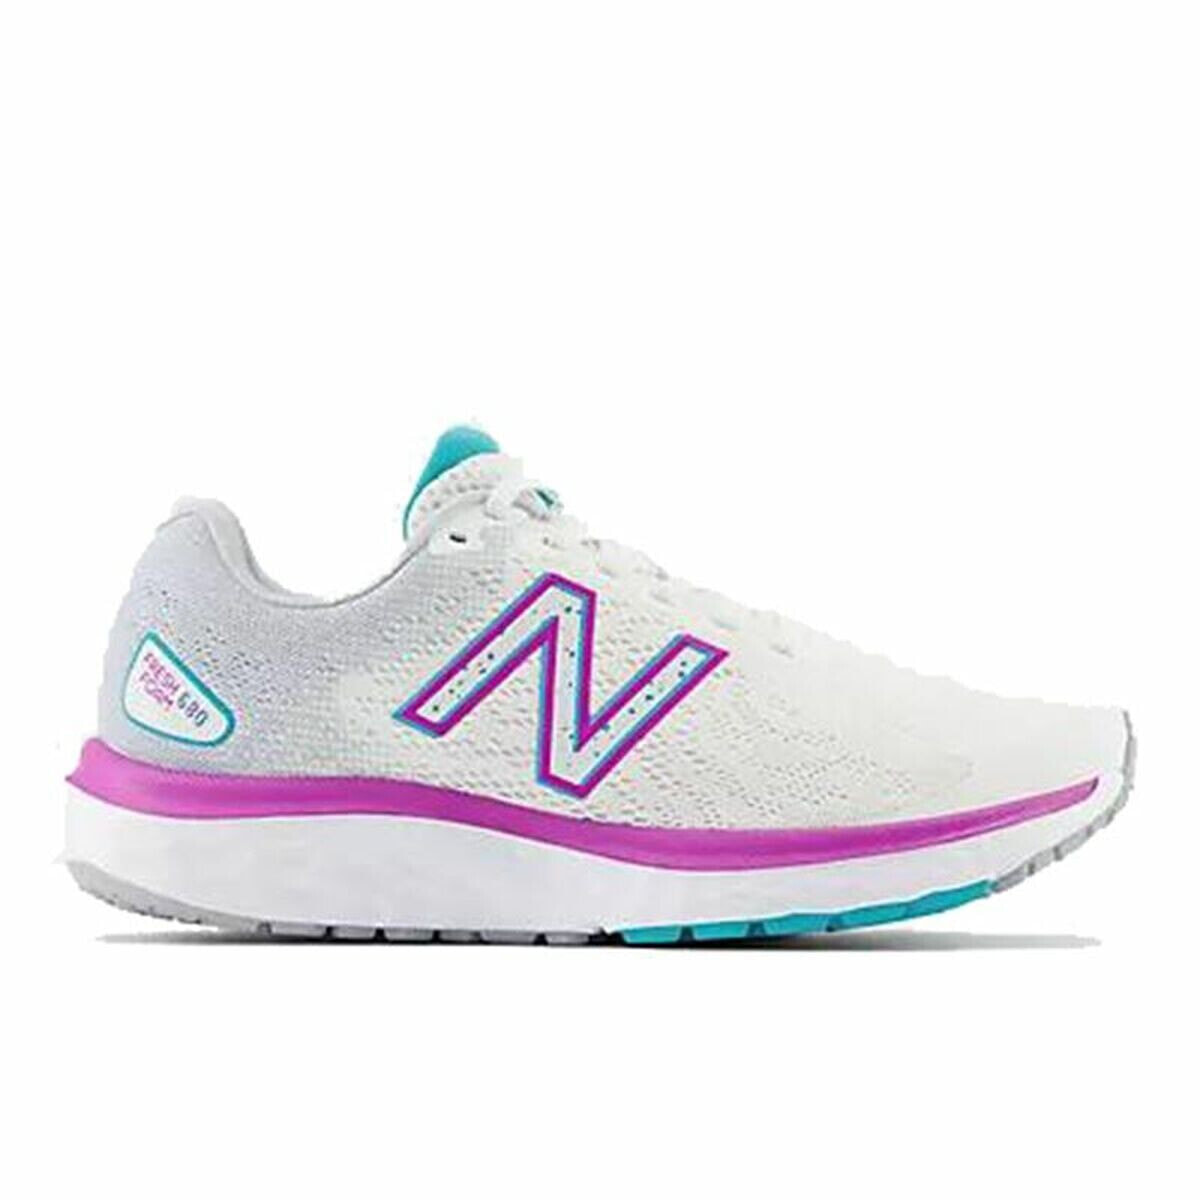 Running Shoes for Adults New Balance Fresh Foam 680v7 Lady White